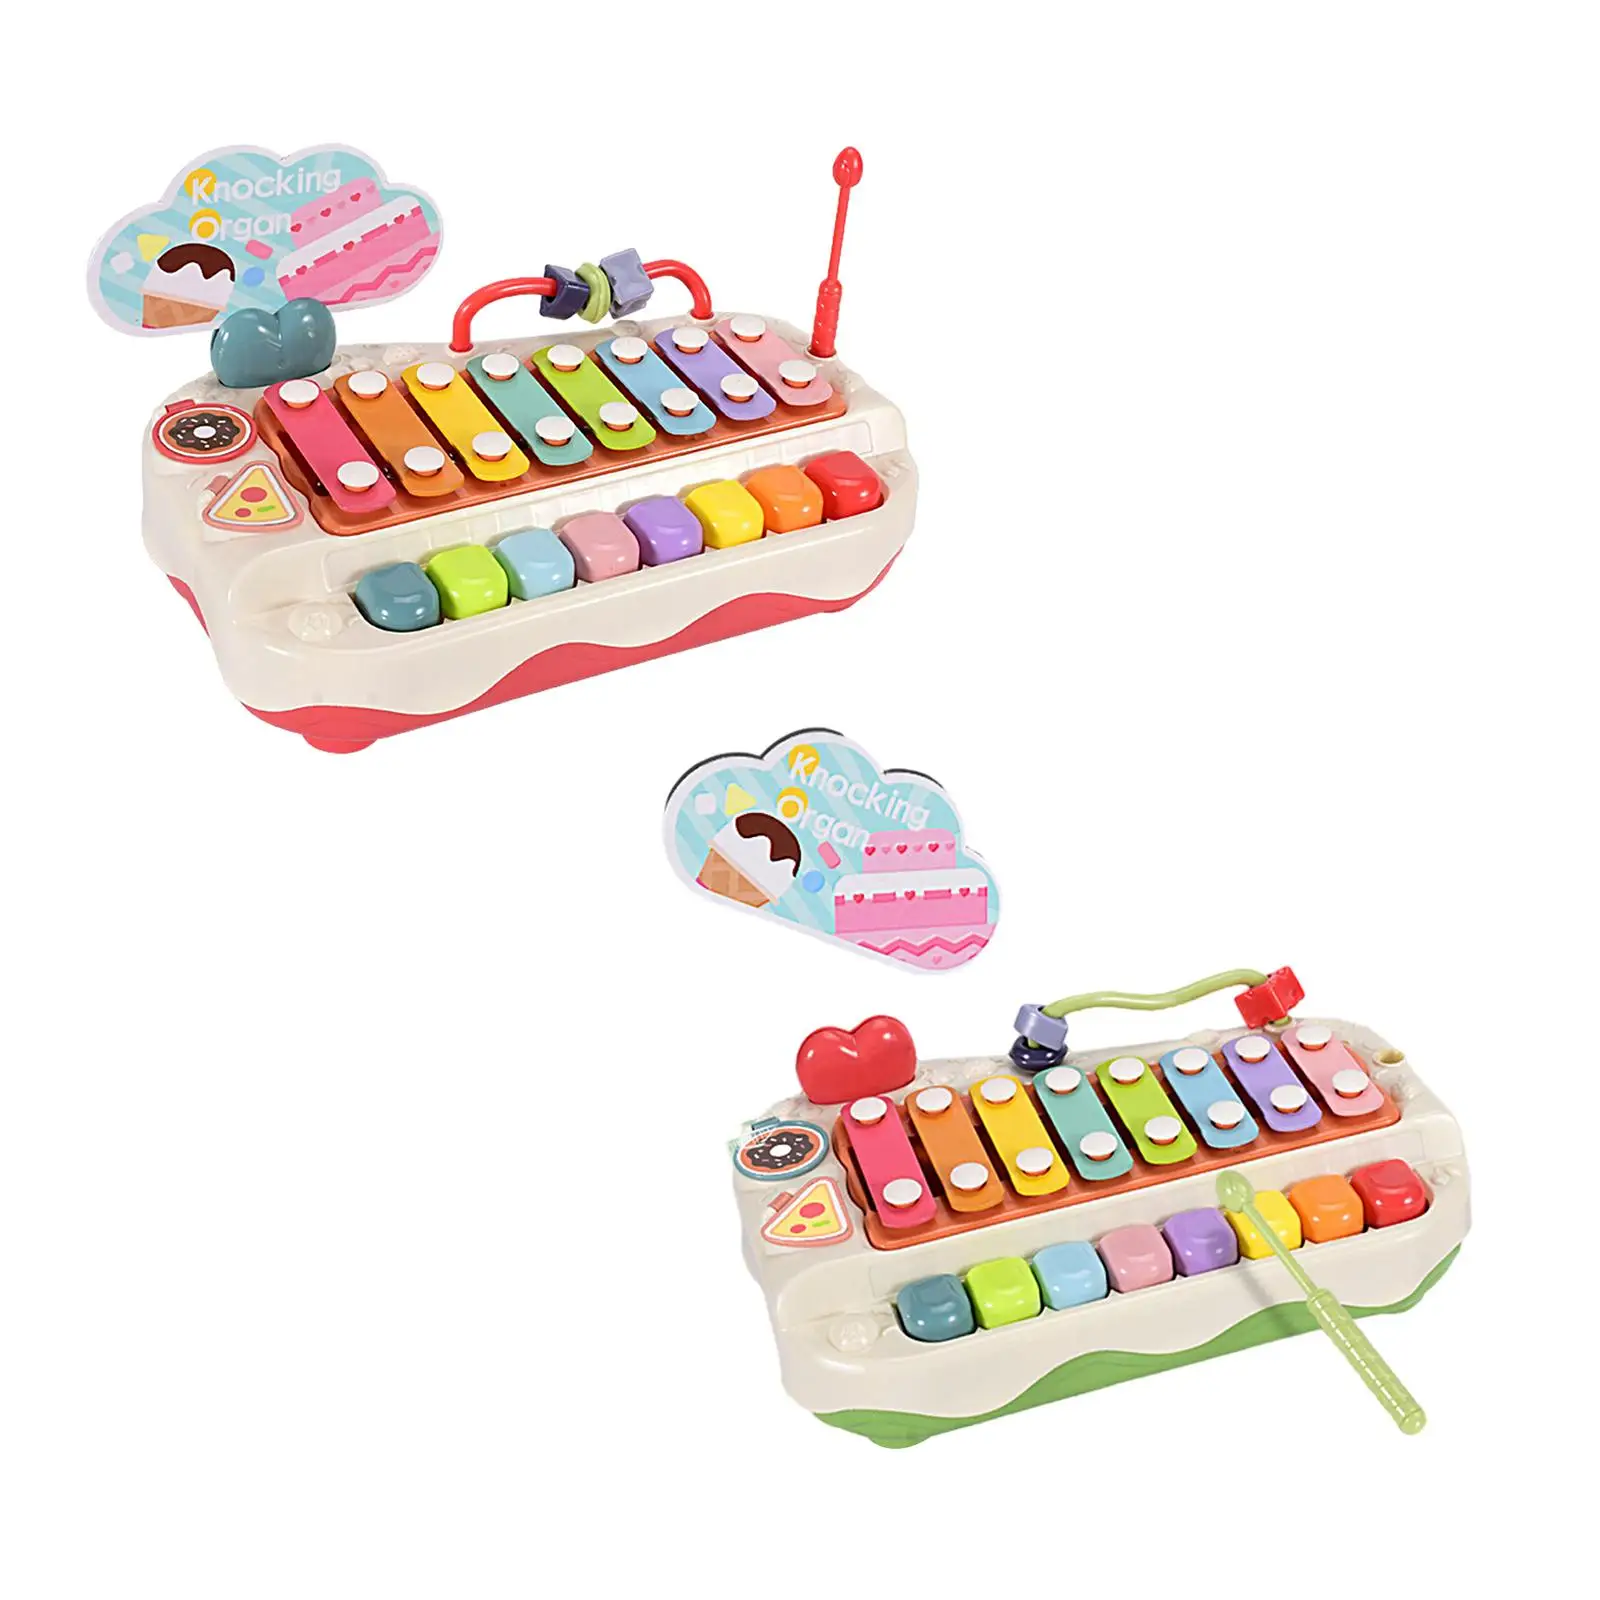 Baby Musical Toy Piano Toy Percussion Instrument Hammering Pounding Toys Musical Instrument Toy for Baby 1 2 3 Years Old Kids